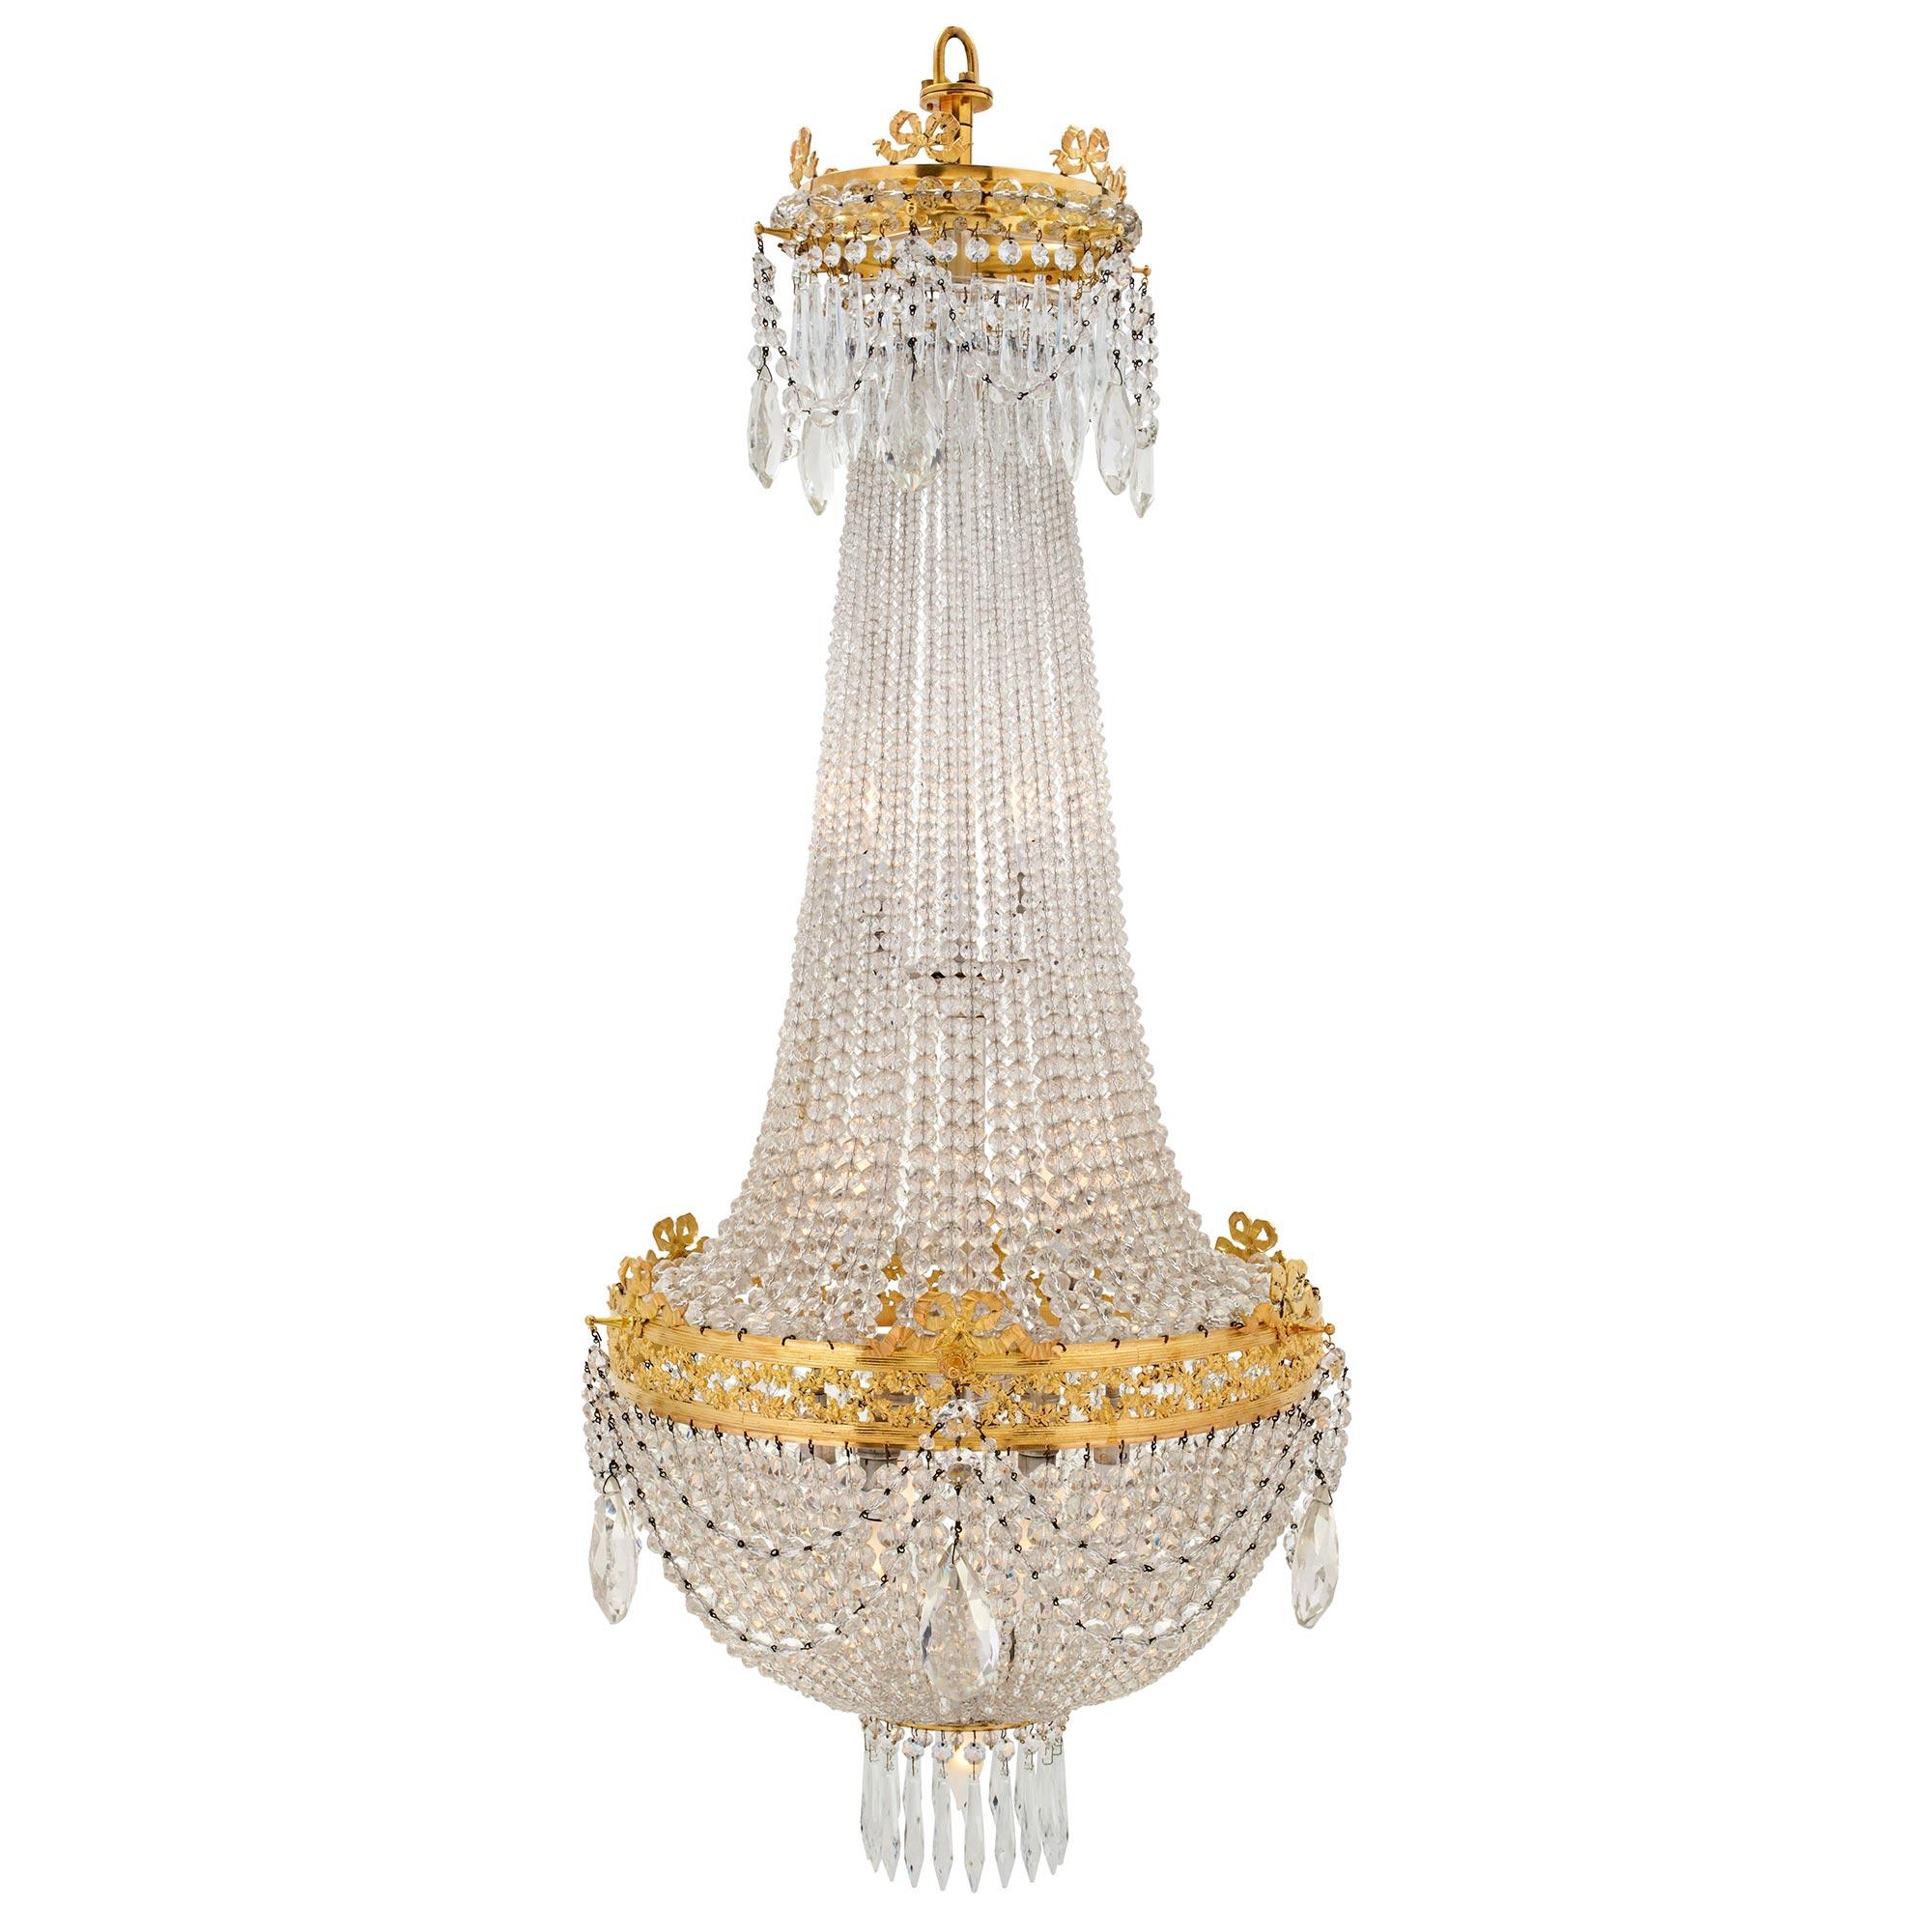 A very elegant French 19th century Louis XVI st. crystal and ormolu chandelier. This Mongolfière, air balloon, designed chandelier has a circular base with hanging pendants. Crystal garlands join to the central pierced ormolu band with foliate